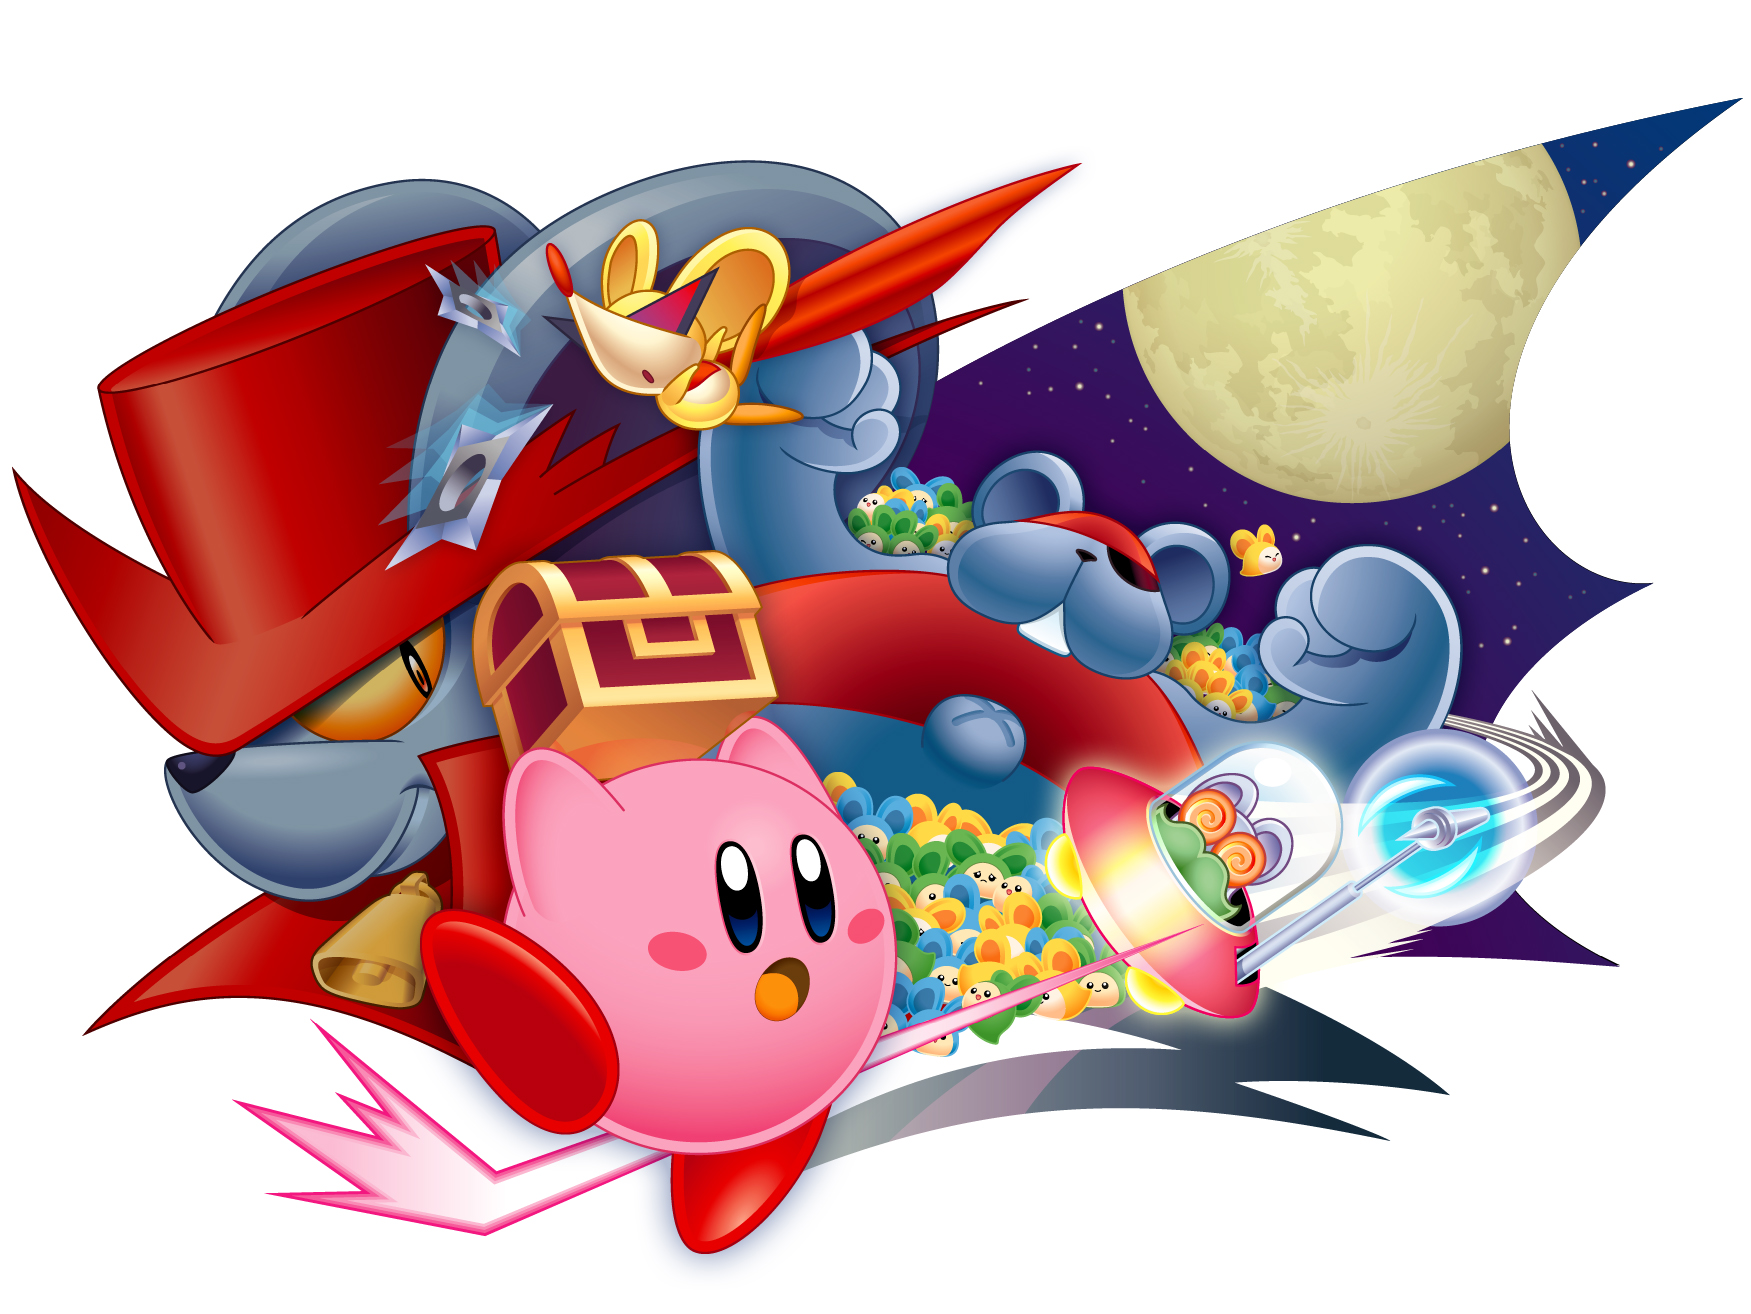 Squeaks - WiKirby: it's a wiki, about Kirby!